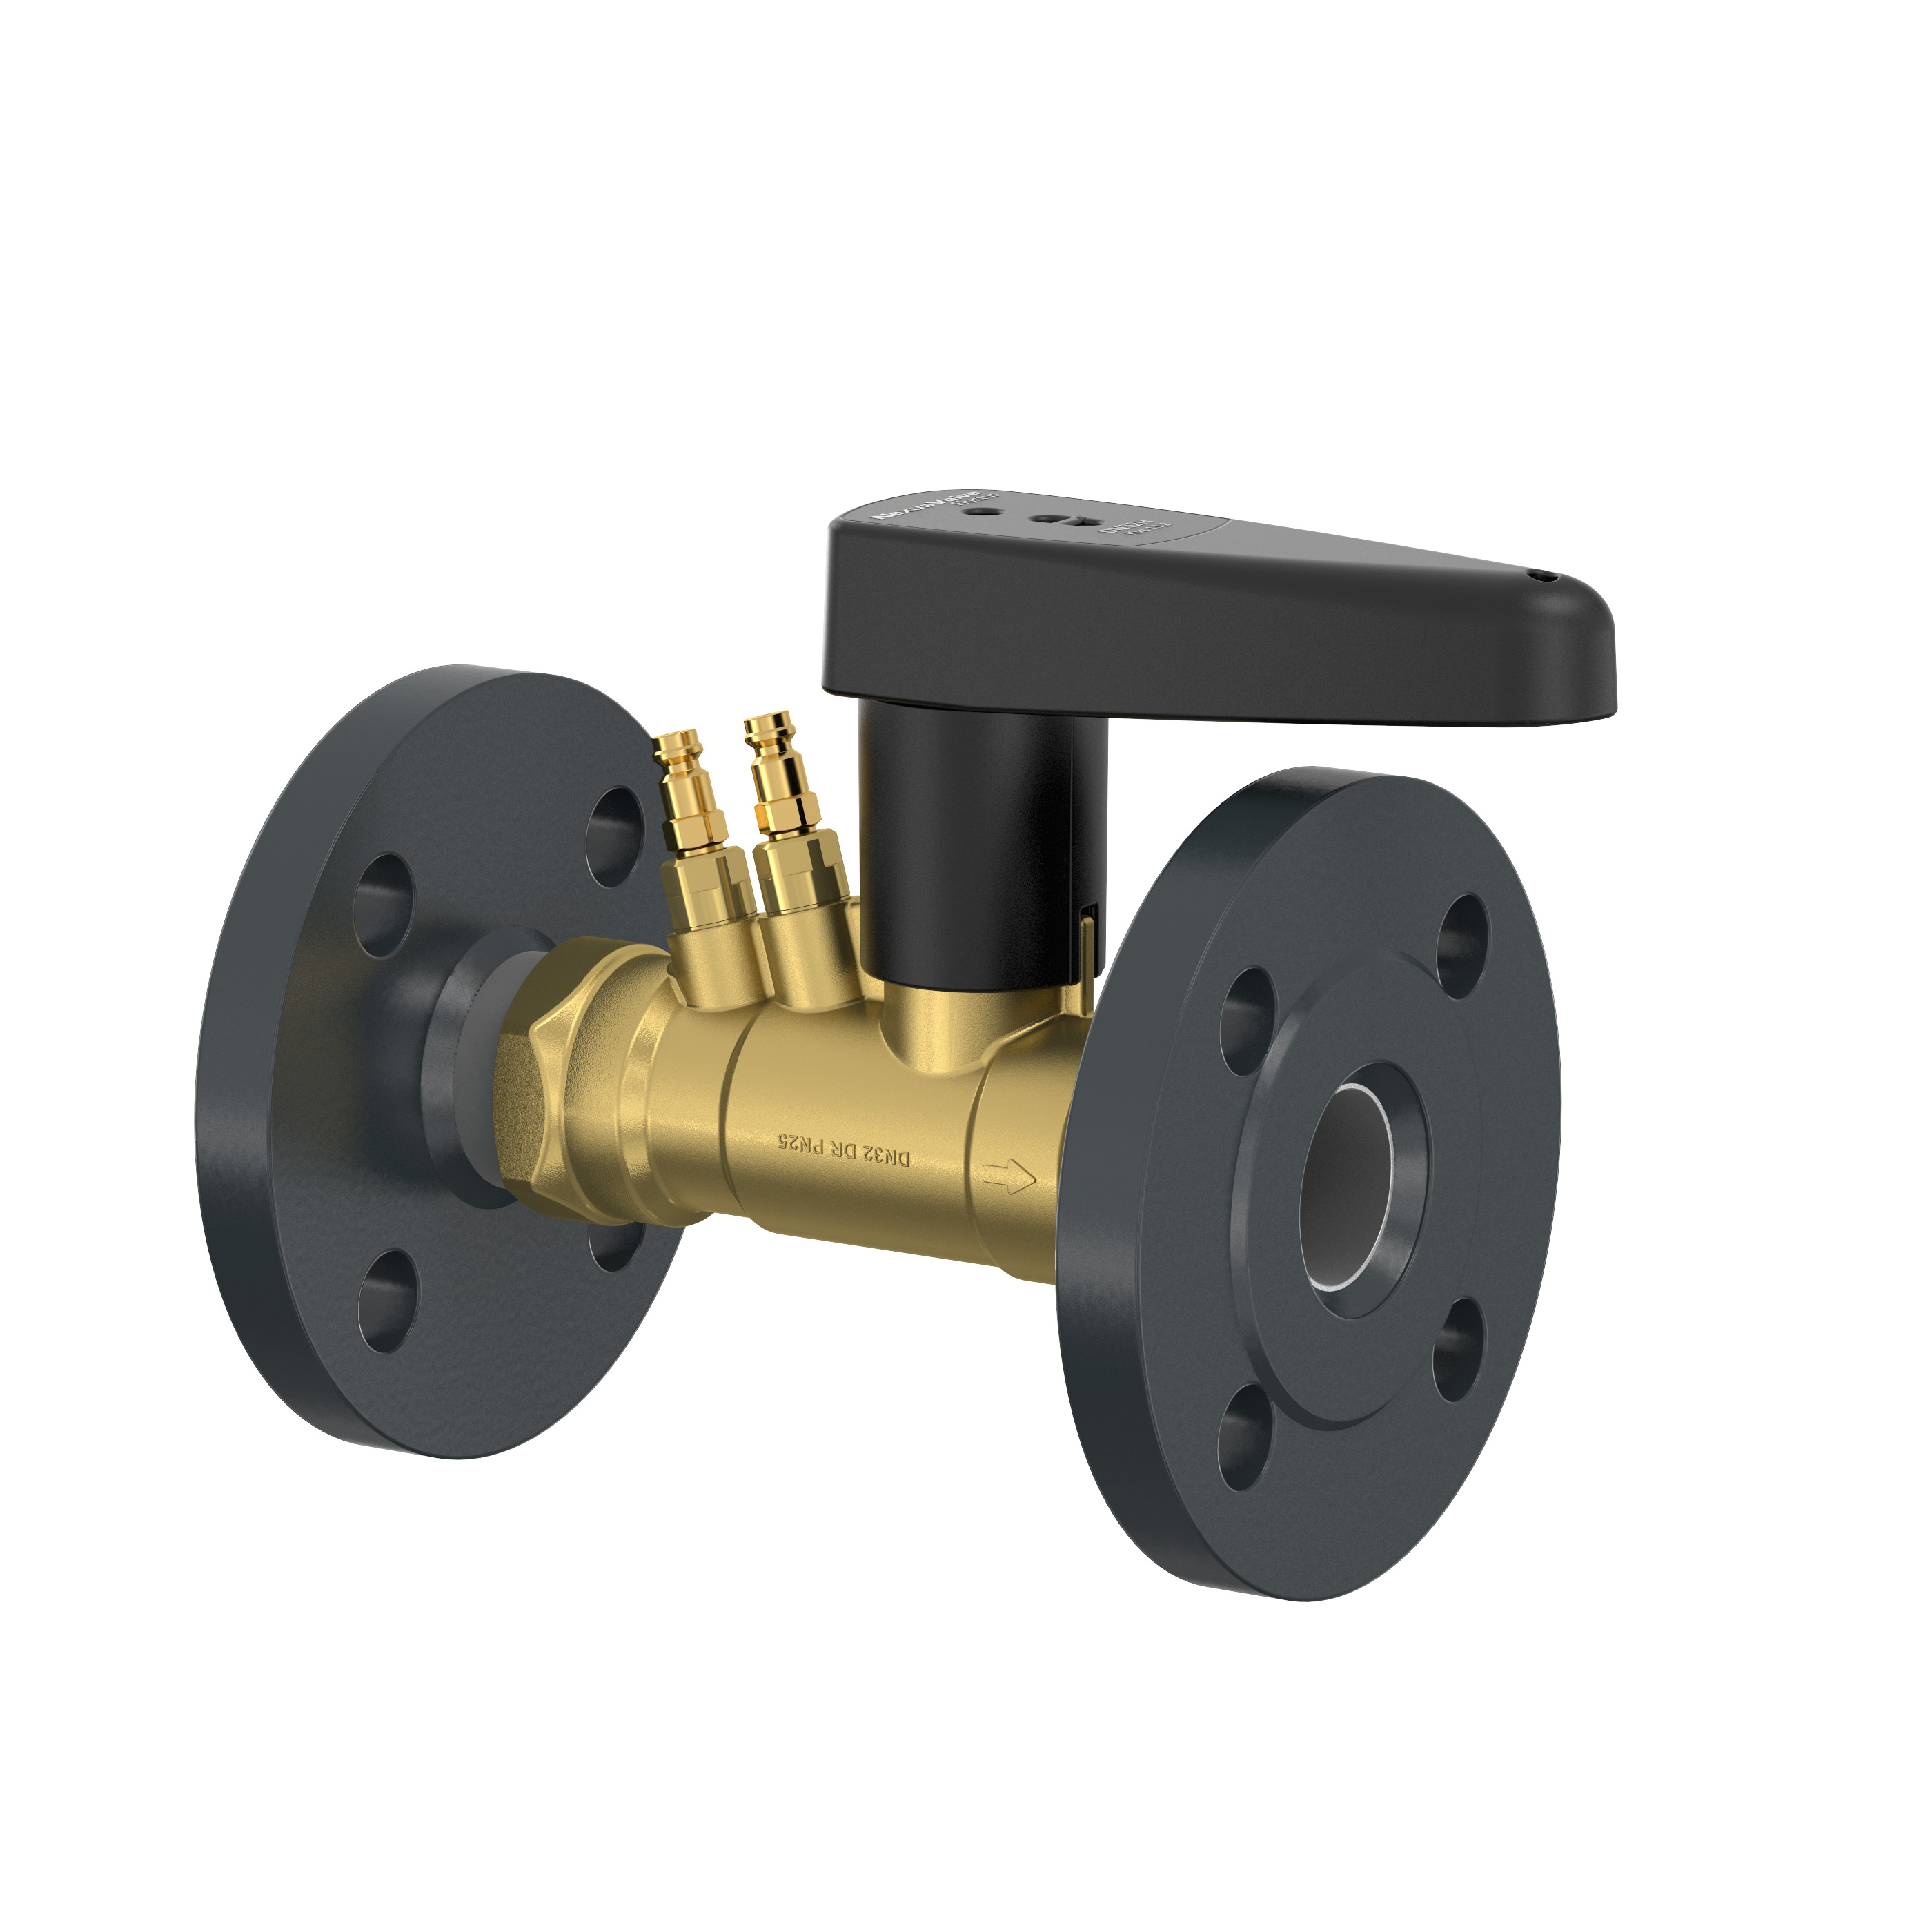 NexusValve Fluctus with flange connection